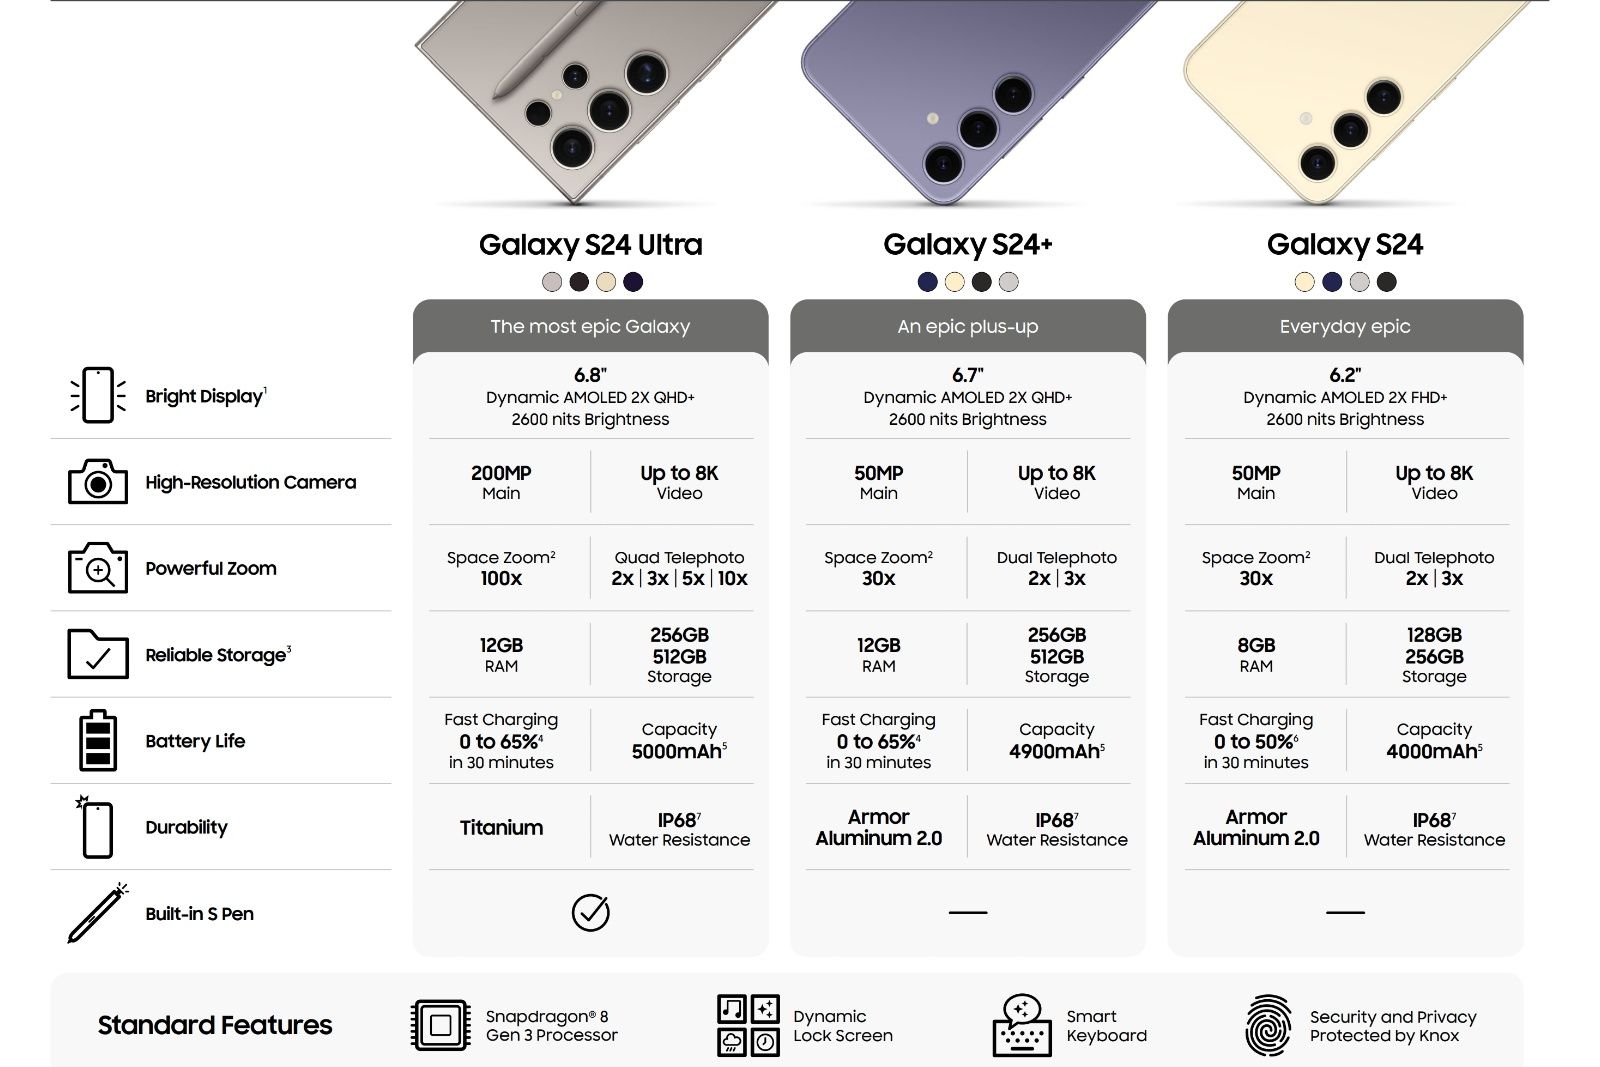 A comprehensive spec sheet of the Galaxy S24, S24+, and S24 Ultra as leaked by Evan Blass.